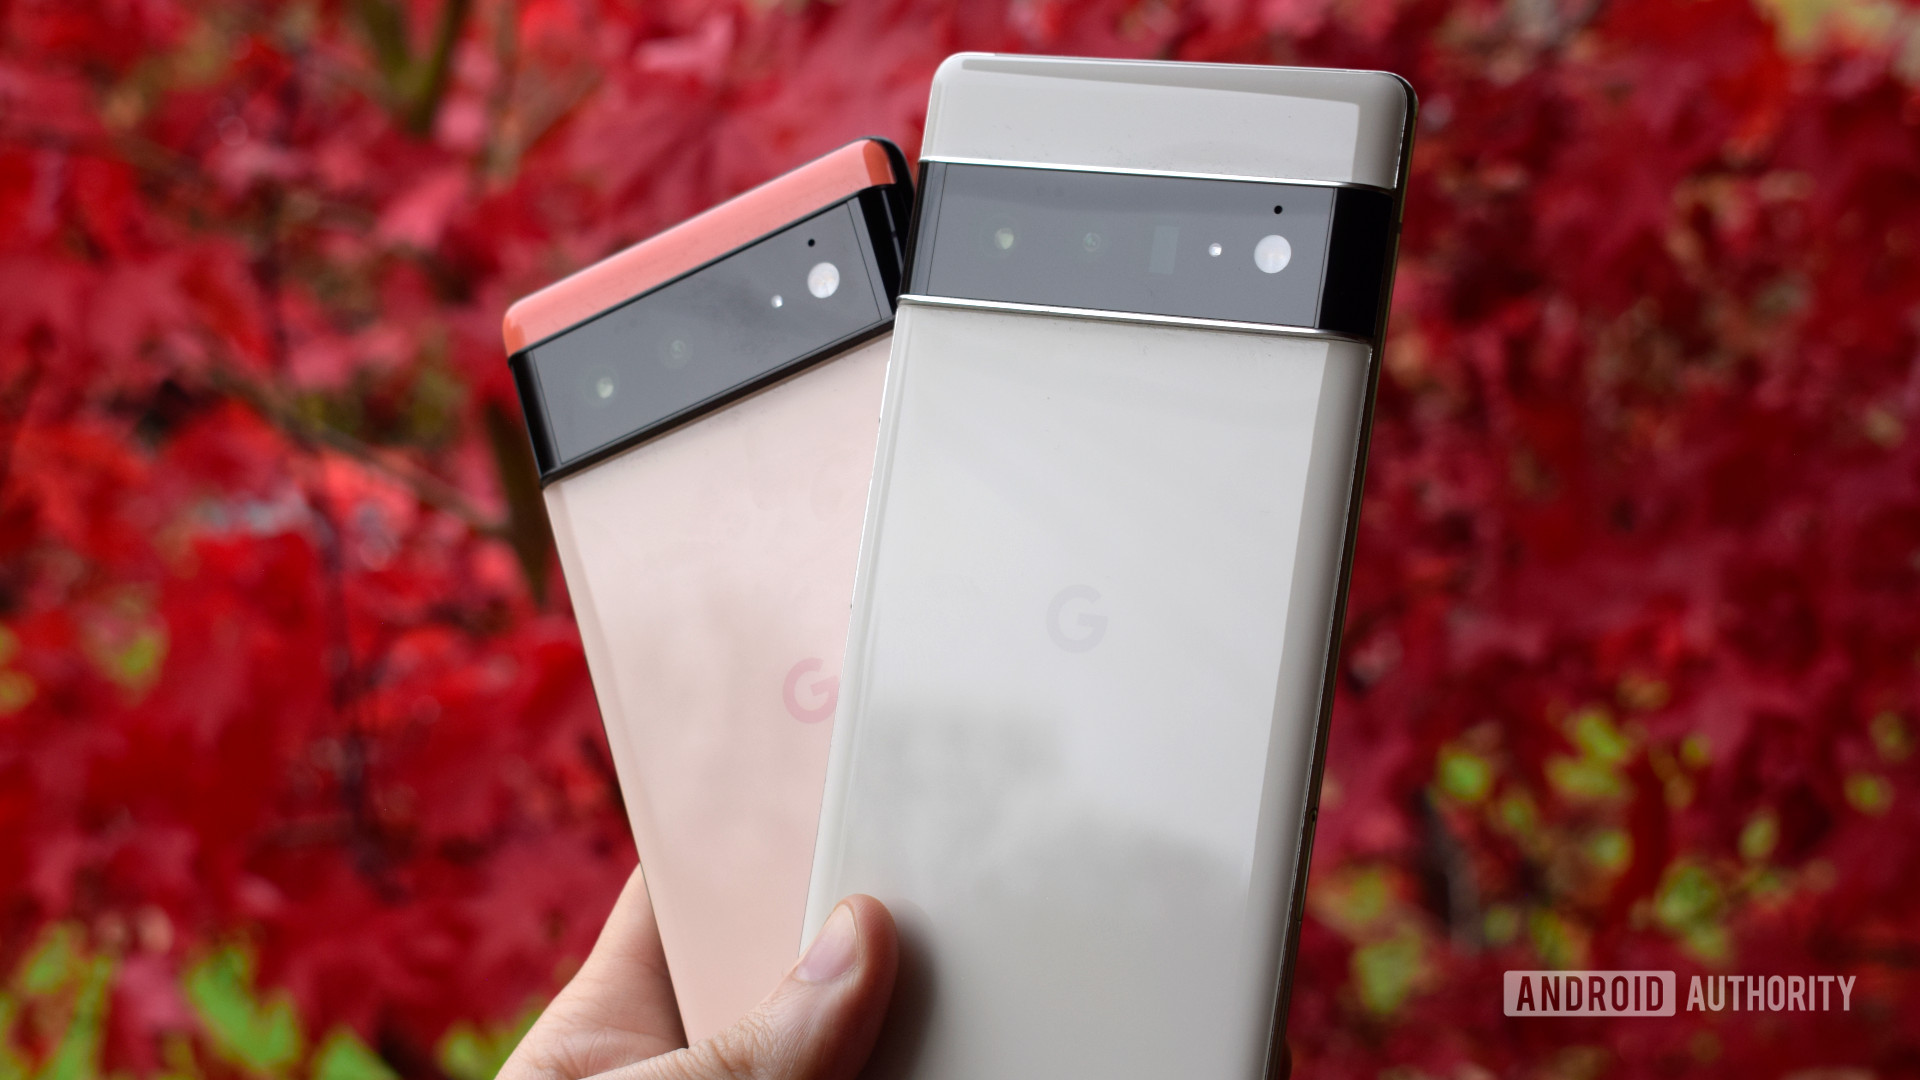 Google Pixel 6 and Pixel 6 Pro on red leaf background - The best unlocked Android phones